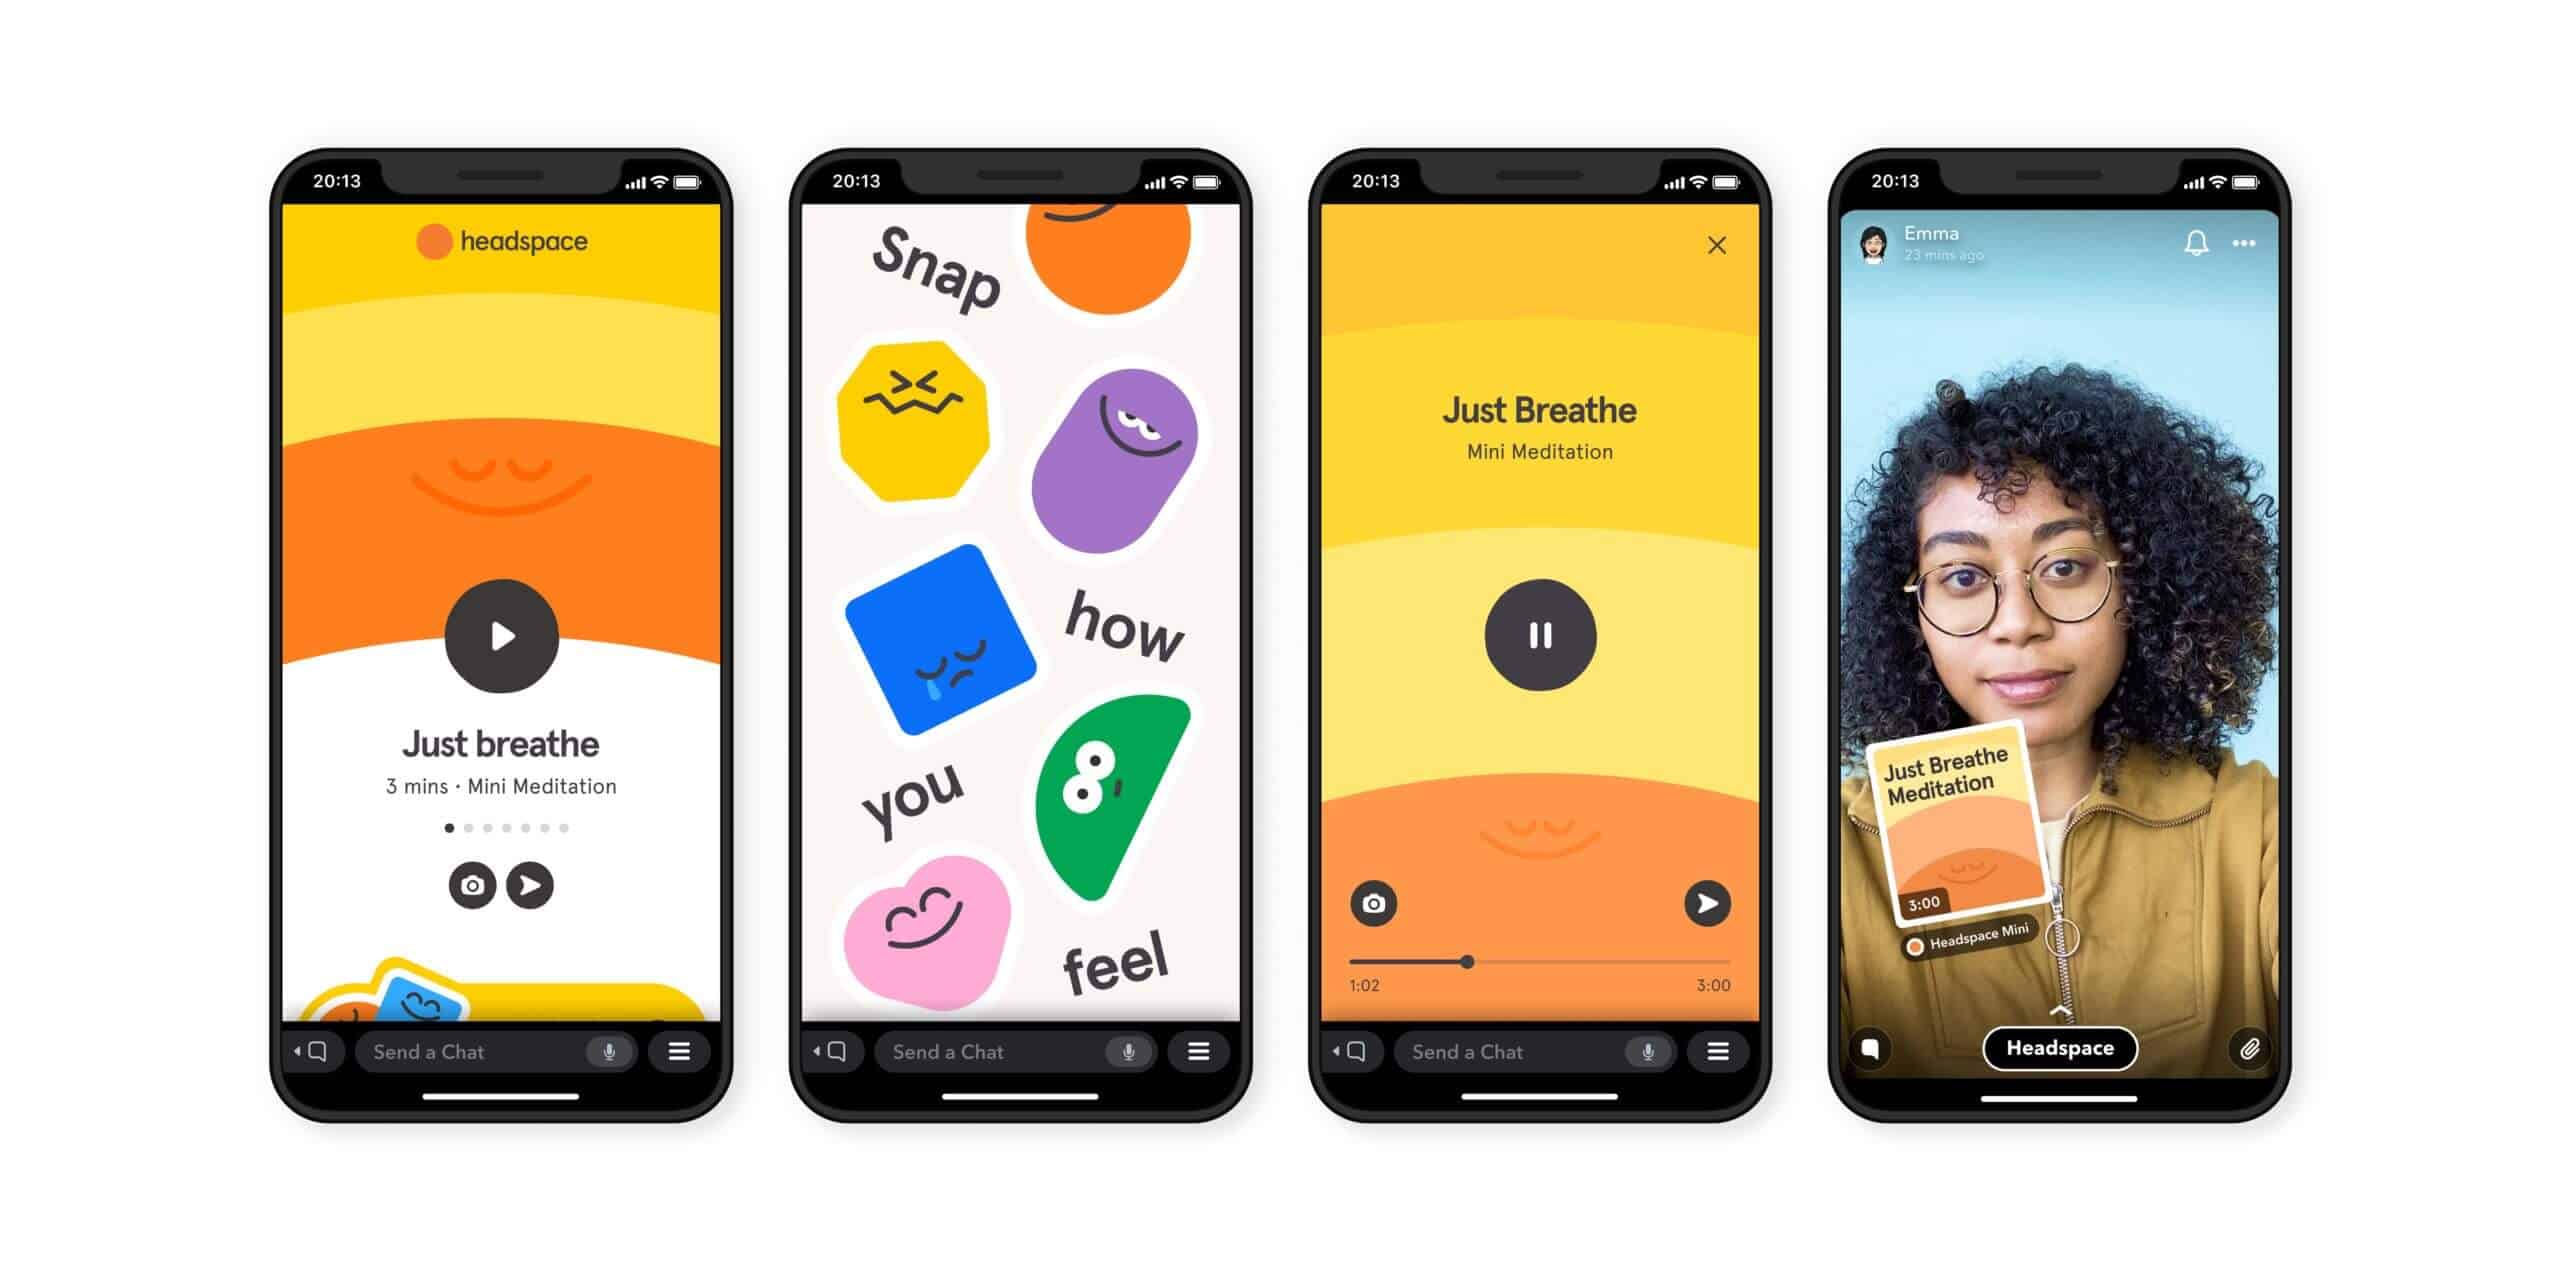 Snapchat Launches In-App Meditation Experience With Headspace